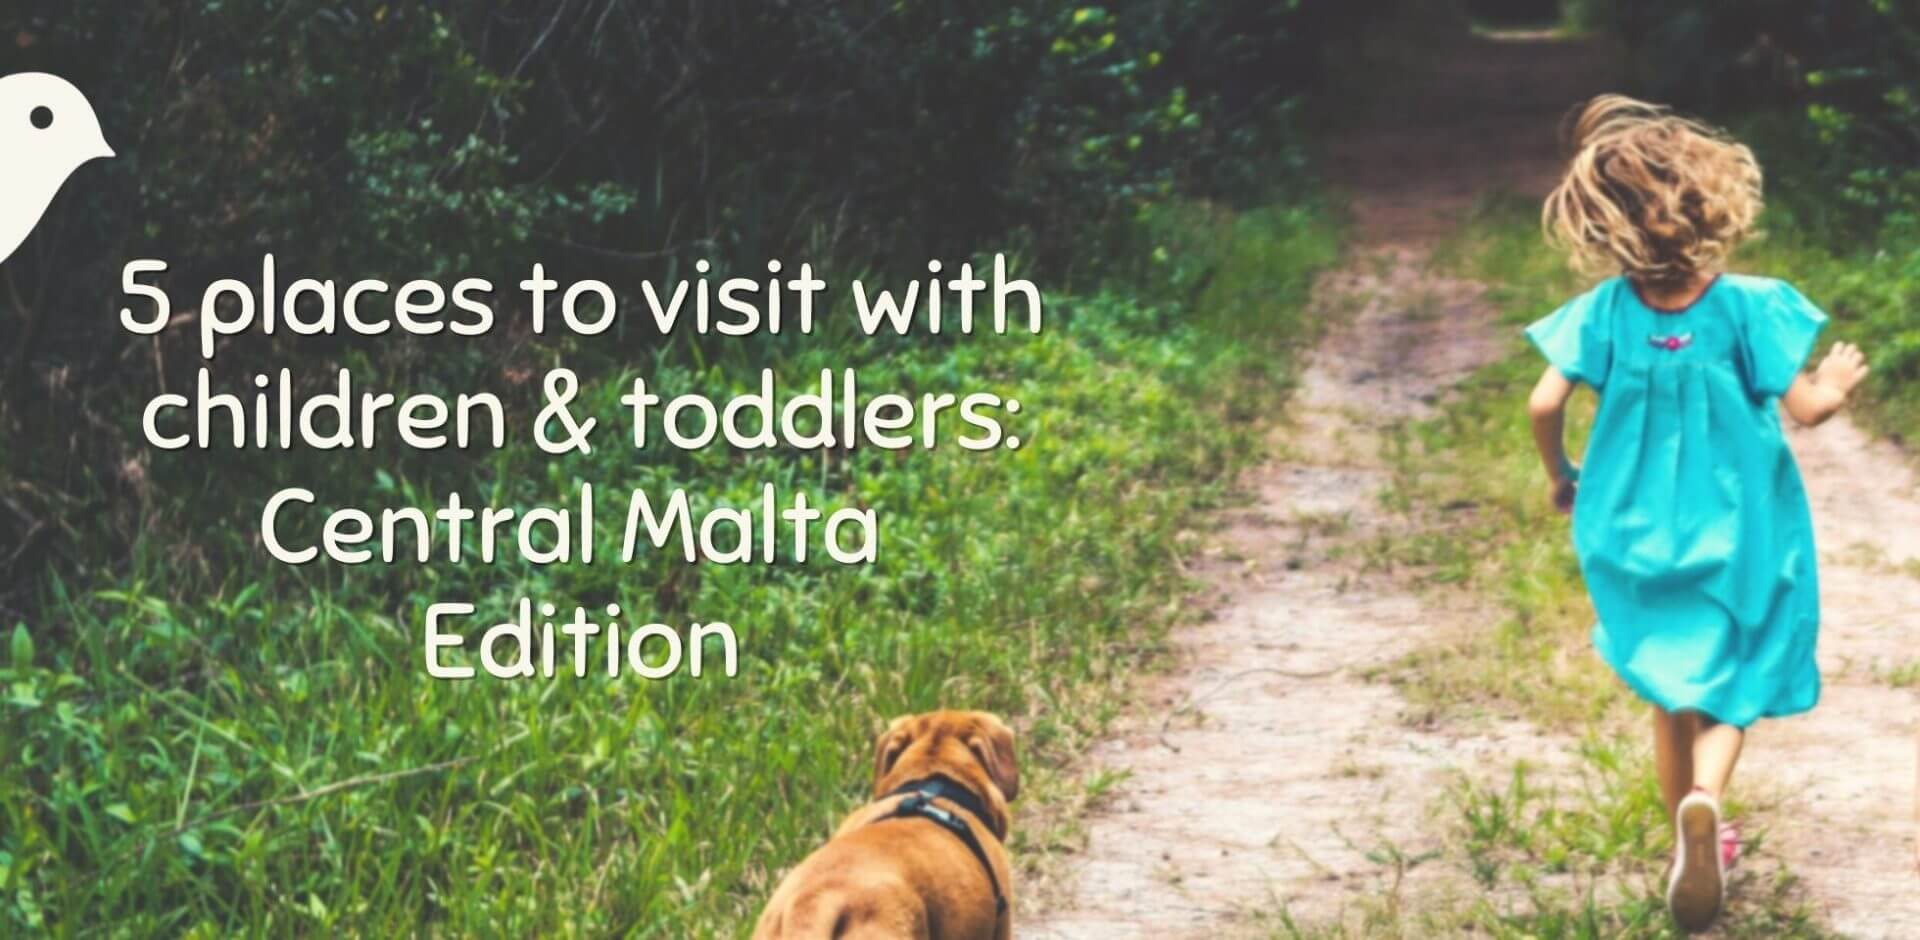 5 places to visit with children & toddlers: Central Malta Edition Facebook Banner